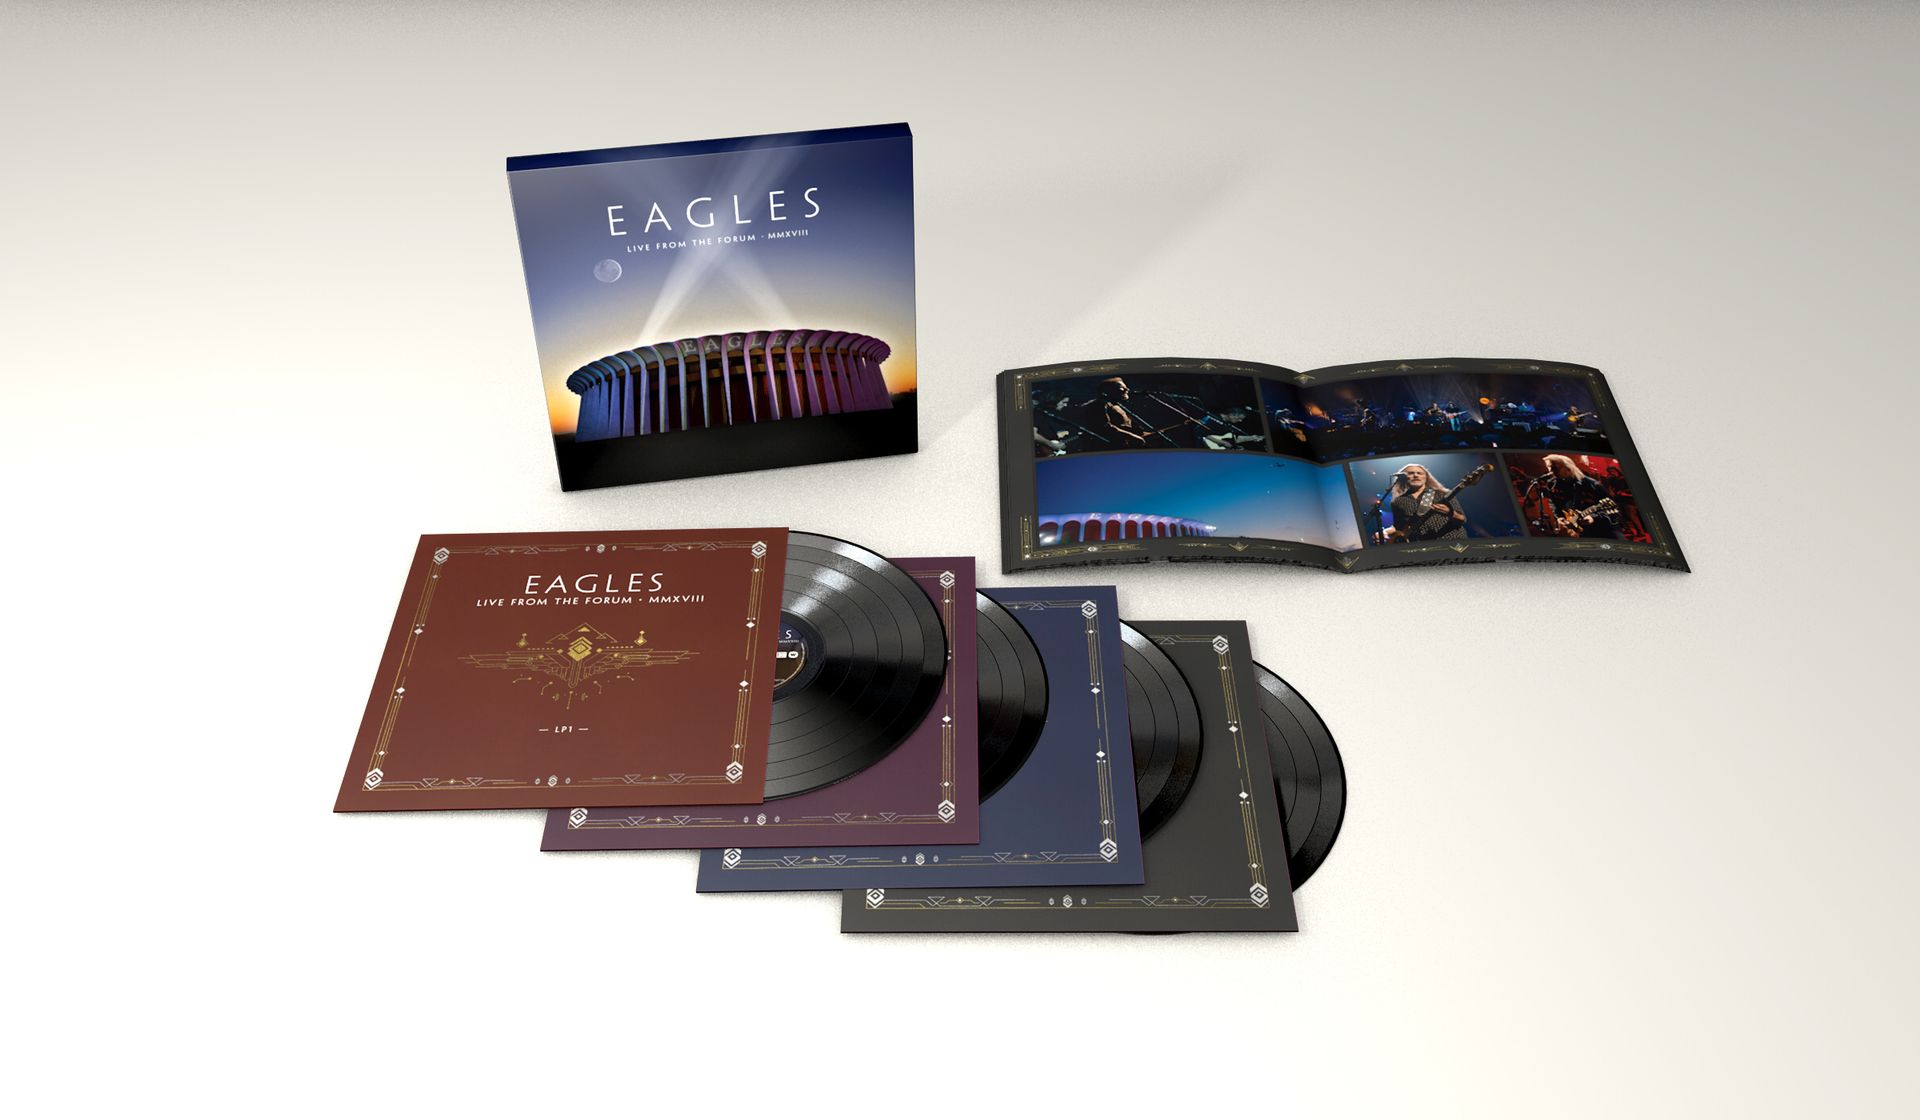 Les Eagles sortent l'album "LIVE FROM THE FORUM MMXVIII"